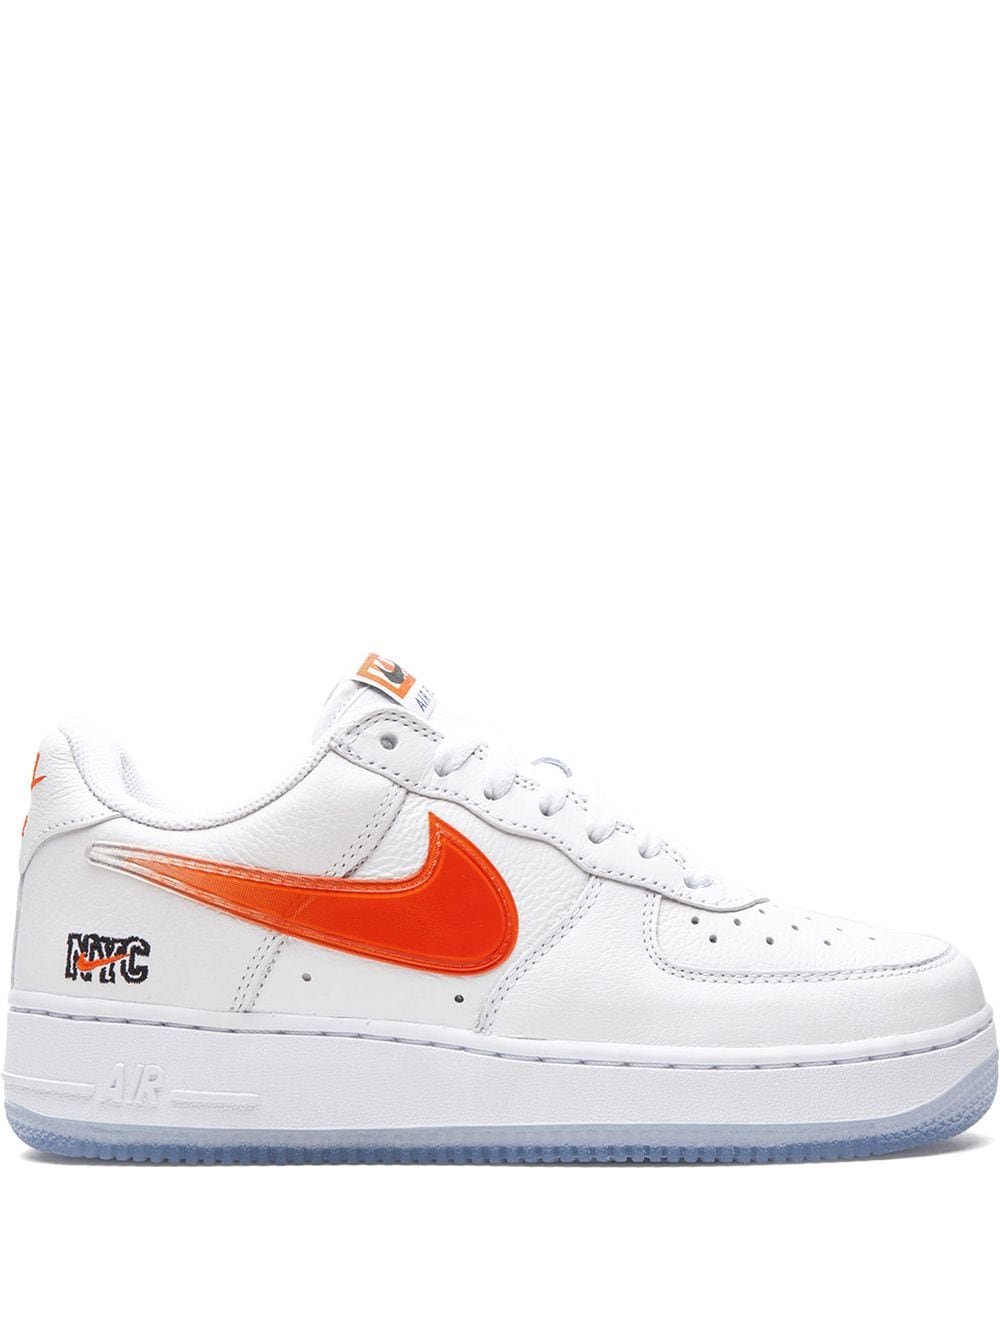 Image 1 of Nike x Kith Air Force 1 Low "Orange" sneakers